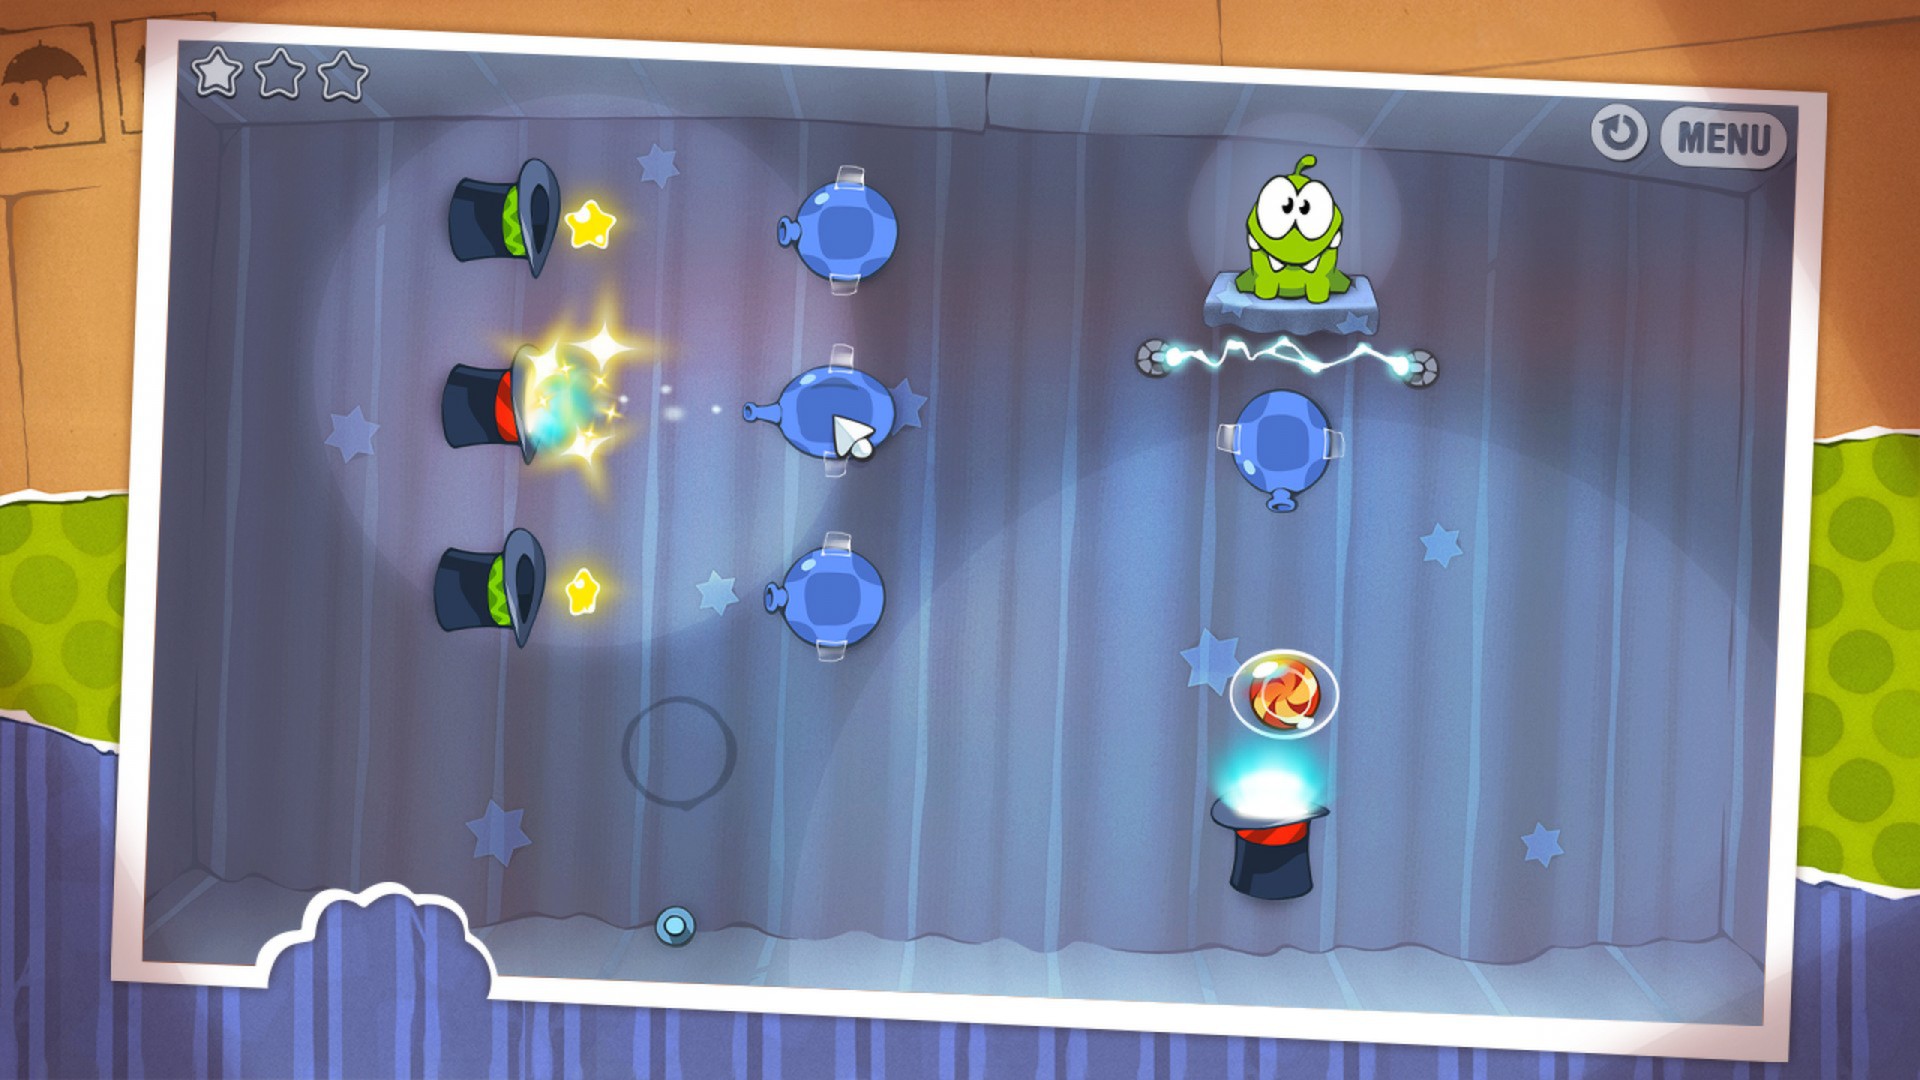 Cut the Rope 1.1 download